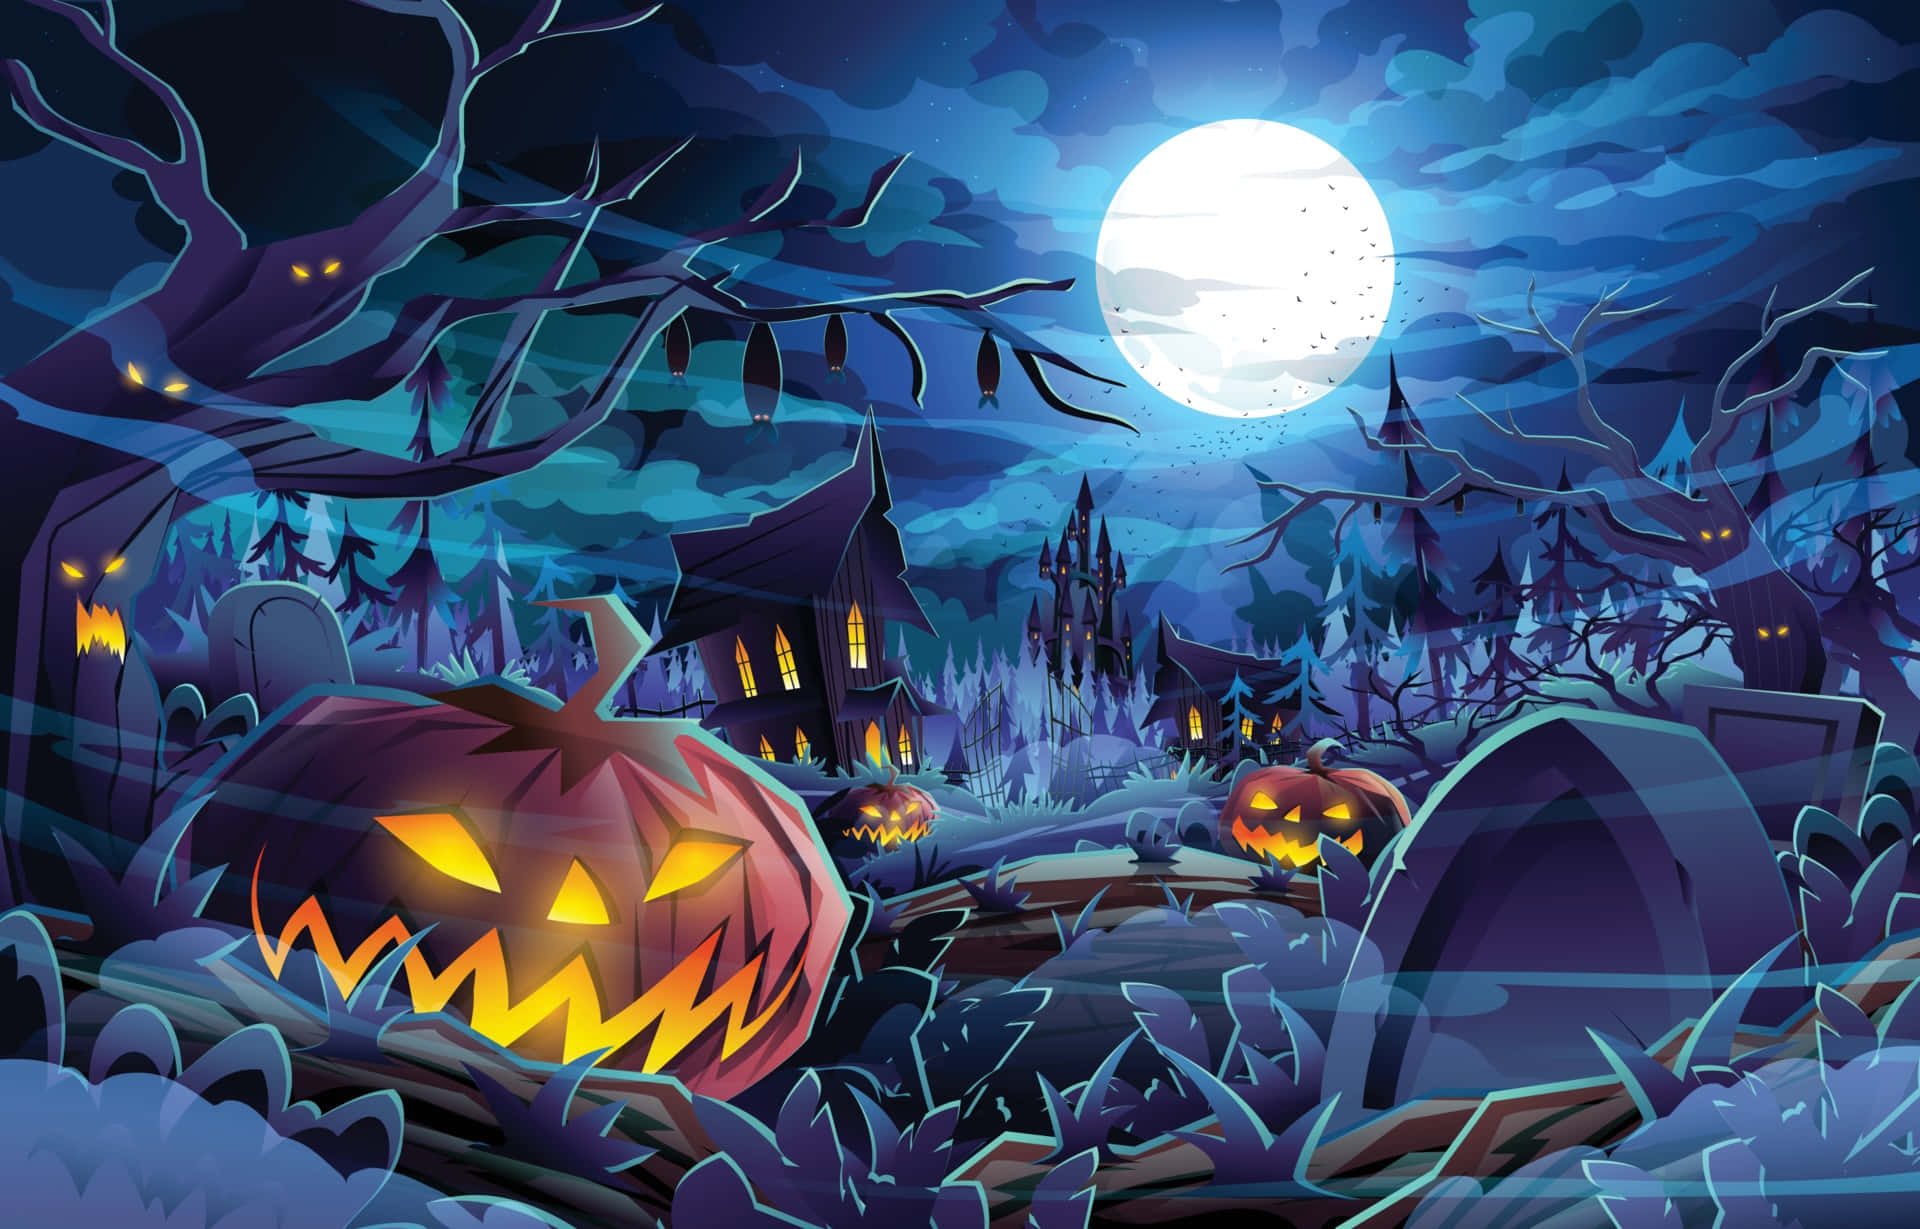 Trick or Treat? Get ready for the spookiest night of the year in this Halloween profile picture!